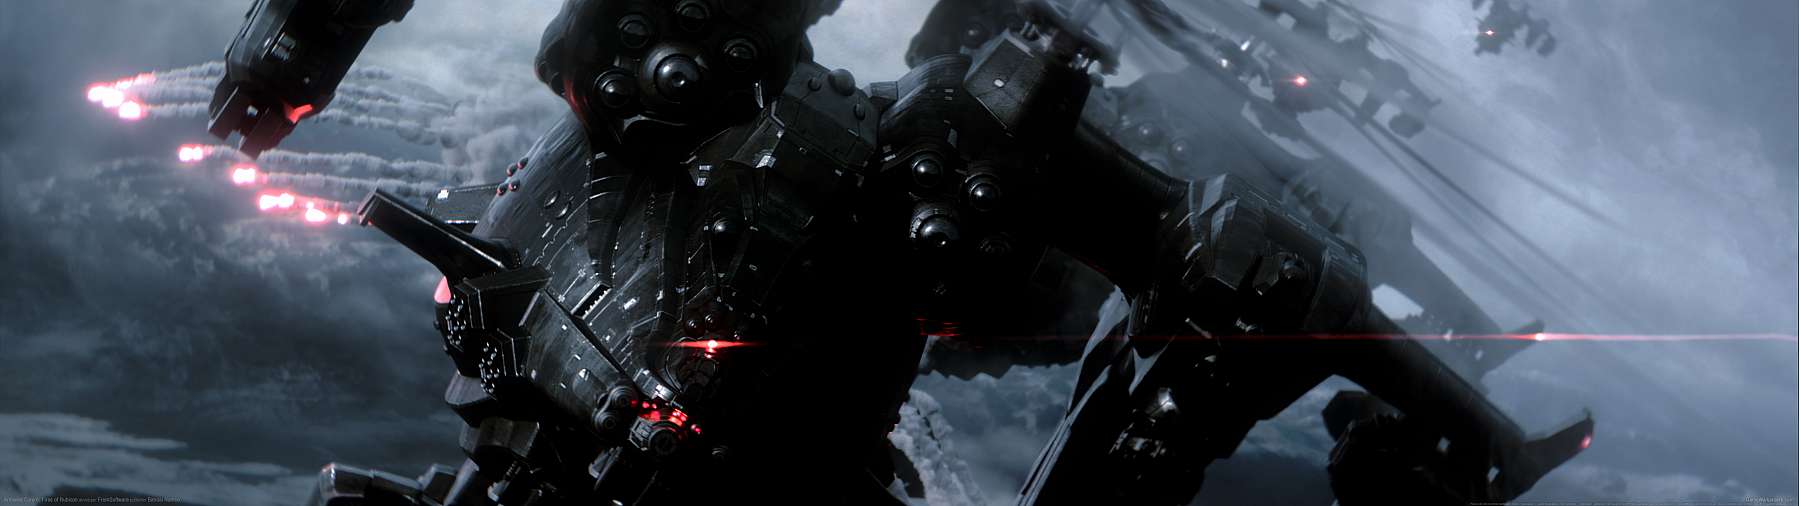 Armored Core 6: Fires of Rubicon superwide wallpaper or background 02